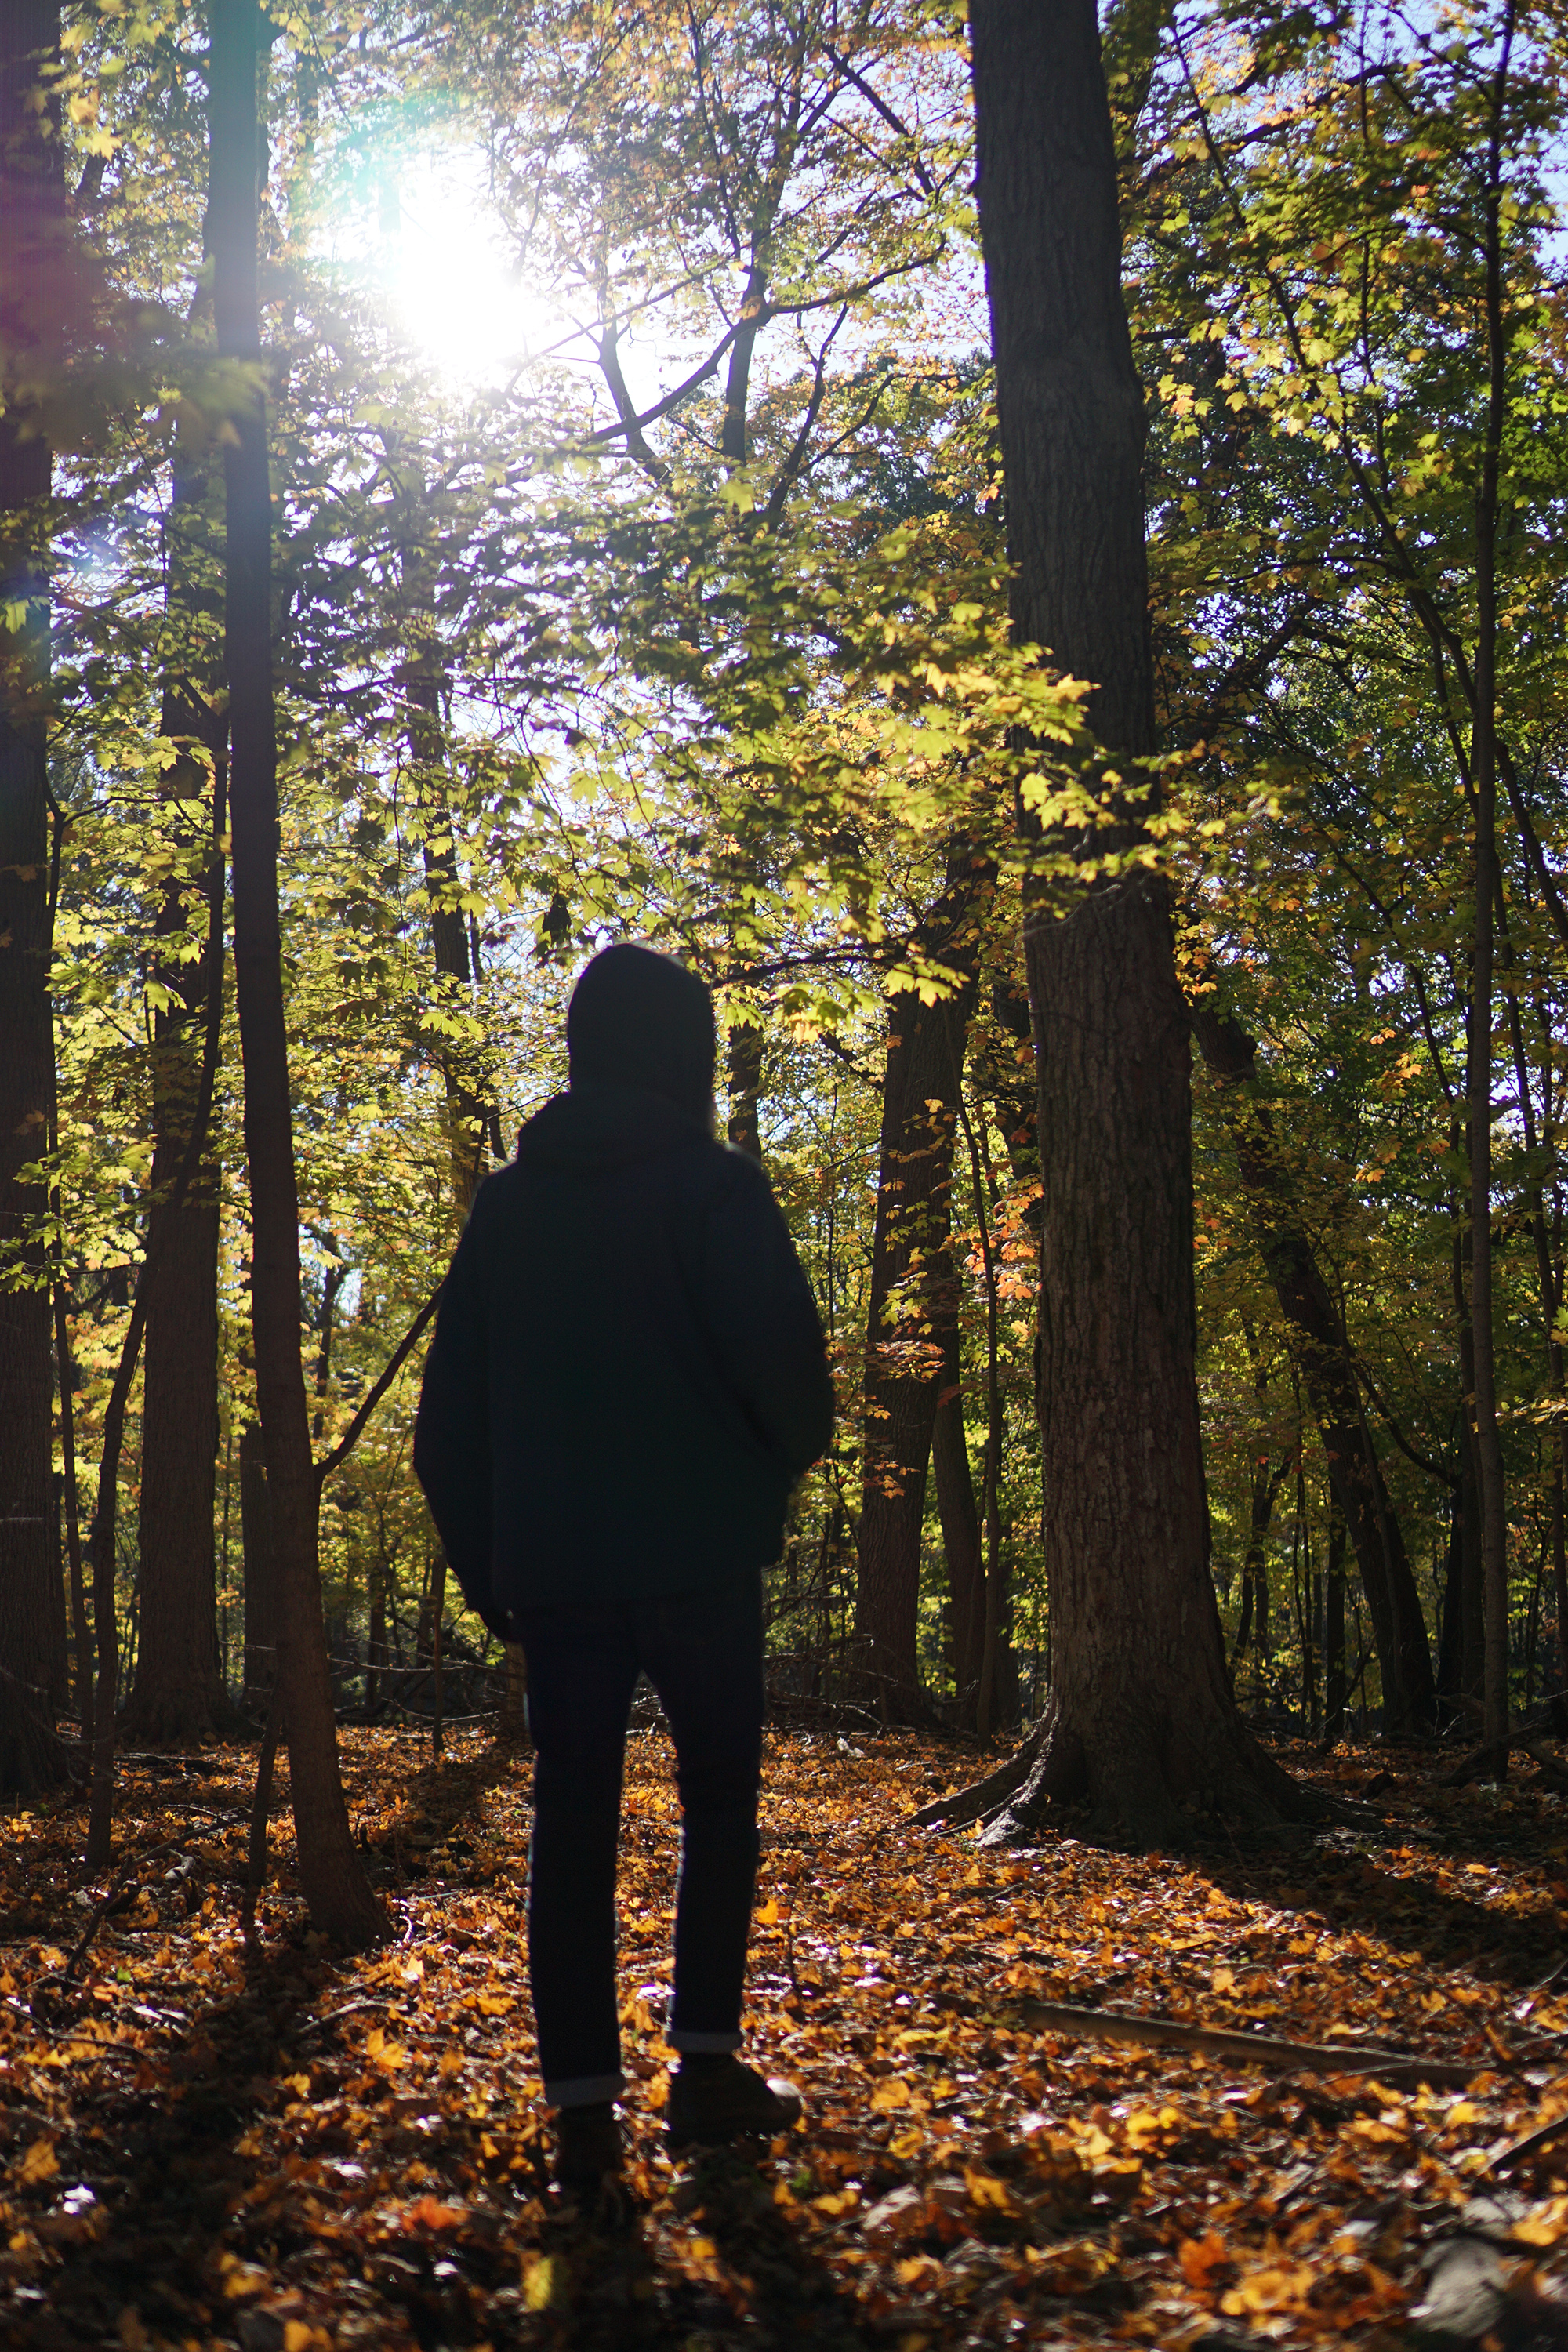 Man silhouetted against fall foliage in Miami Woods, Morton Grove Illinois / Darker than Green